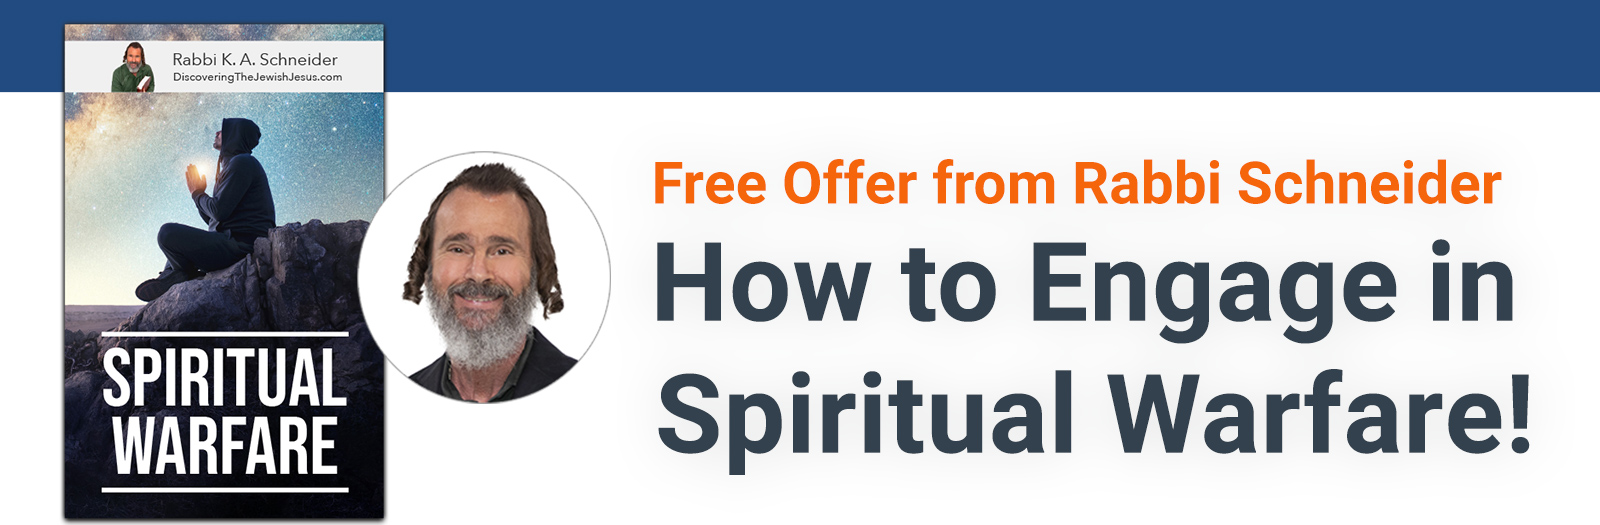 How to Engage in Spiritual Warfare! - Free Offer from Rabbi Schneider